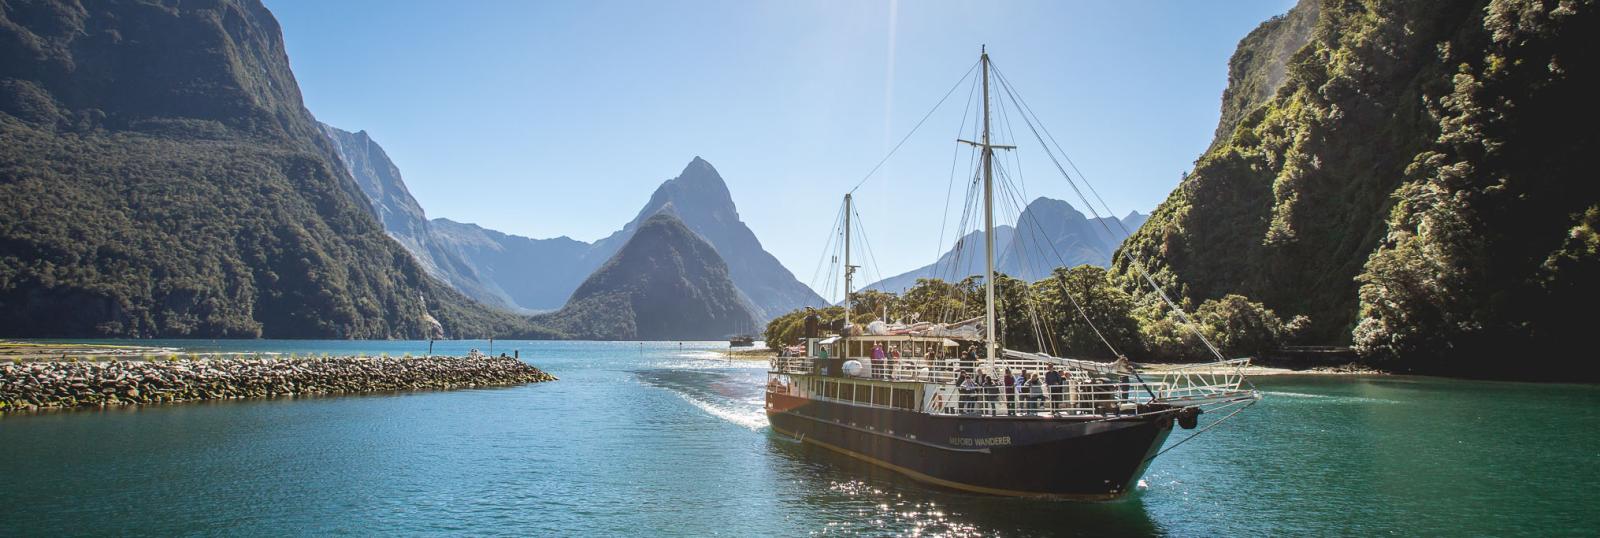 Cruise ship coming into Milford Sound